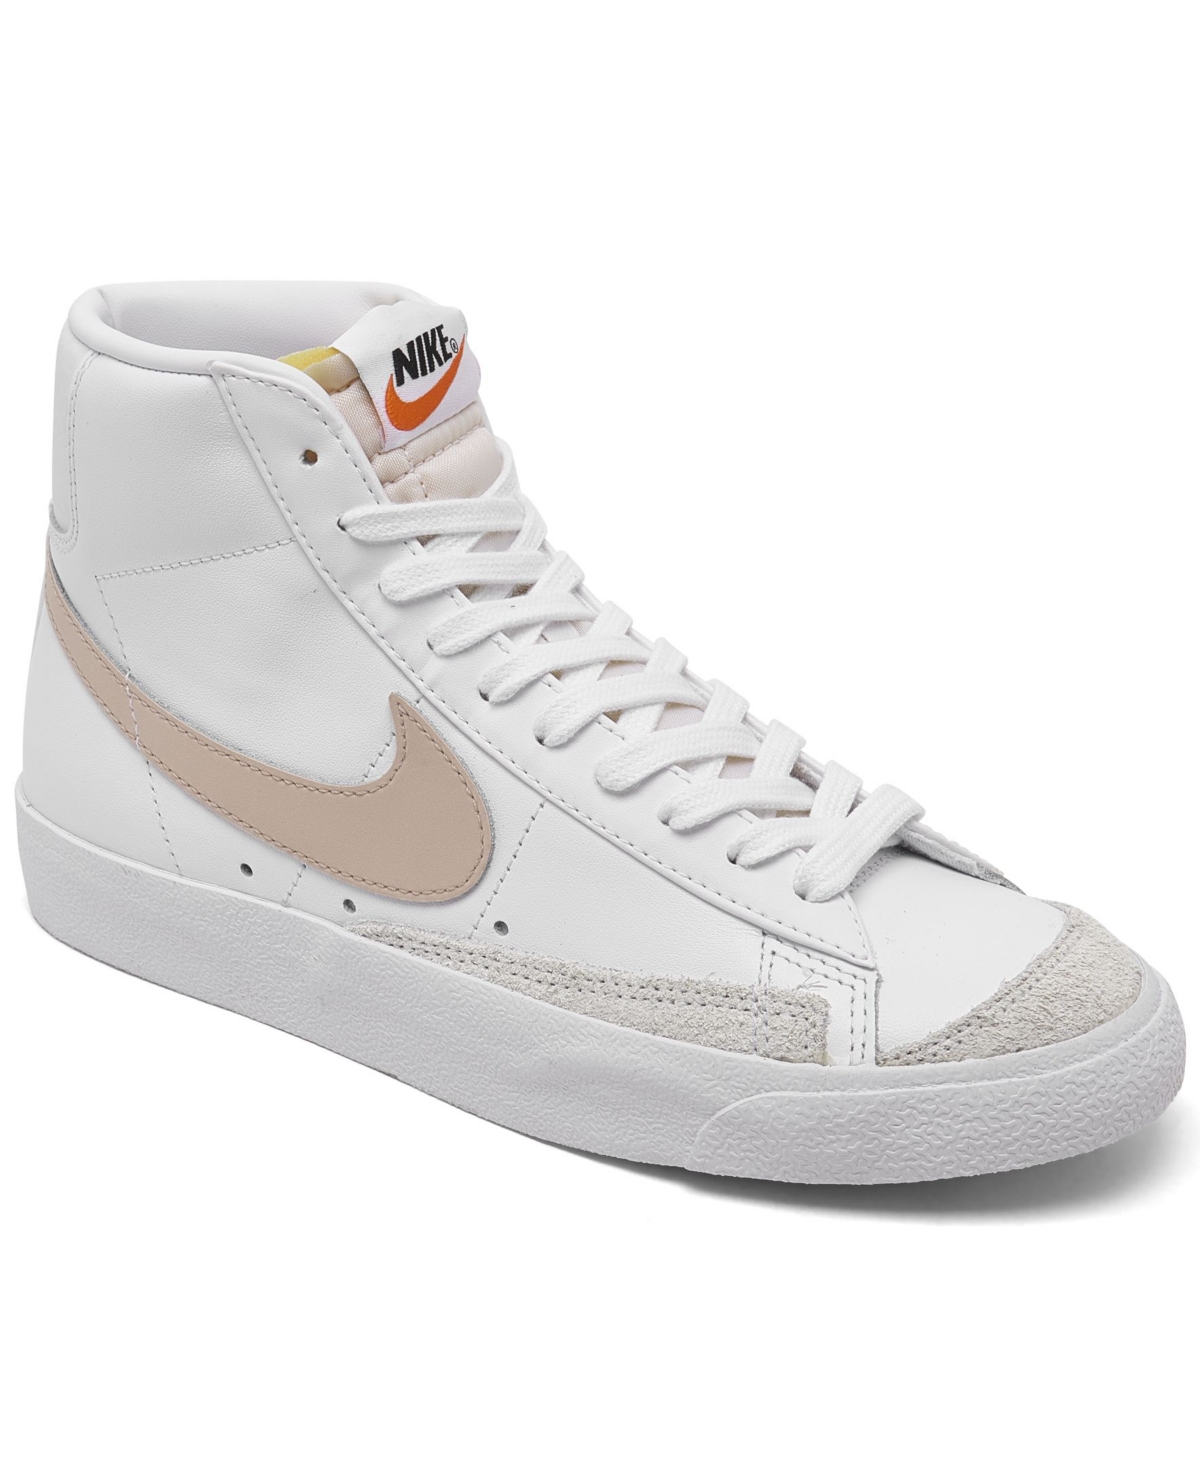 Shop Nike Women's Blazer Mid 77 Casual Sneakers From Finish Line In White,pink Oxford